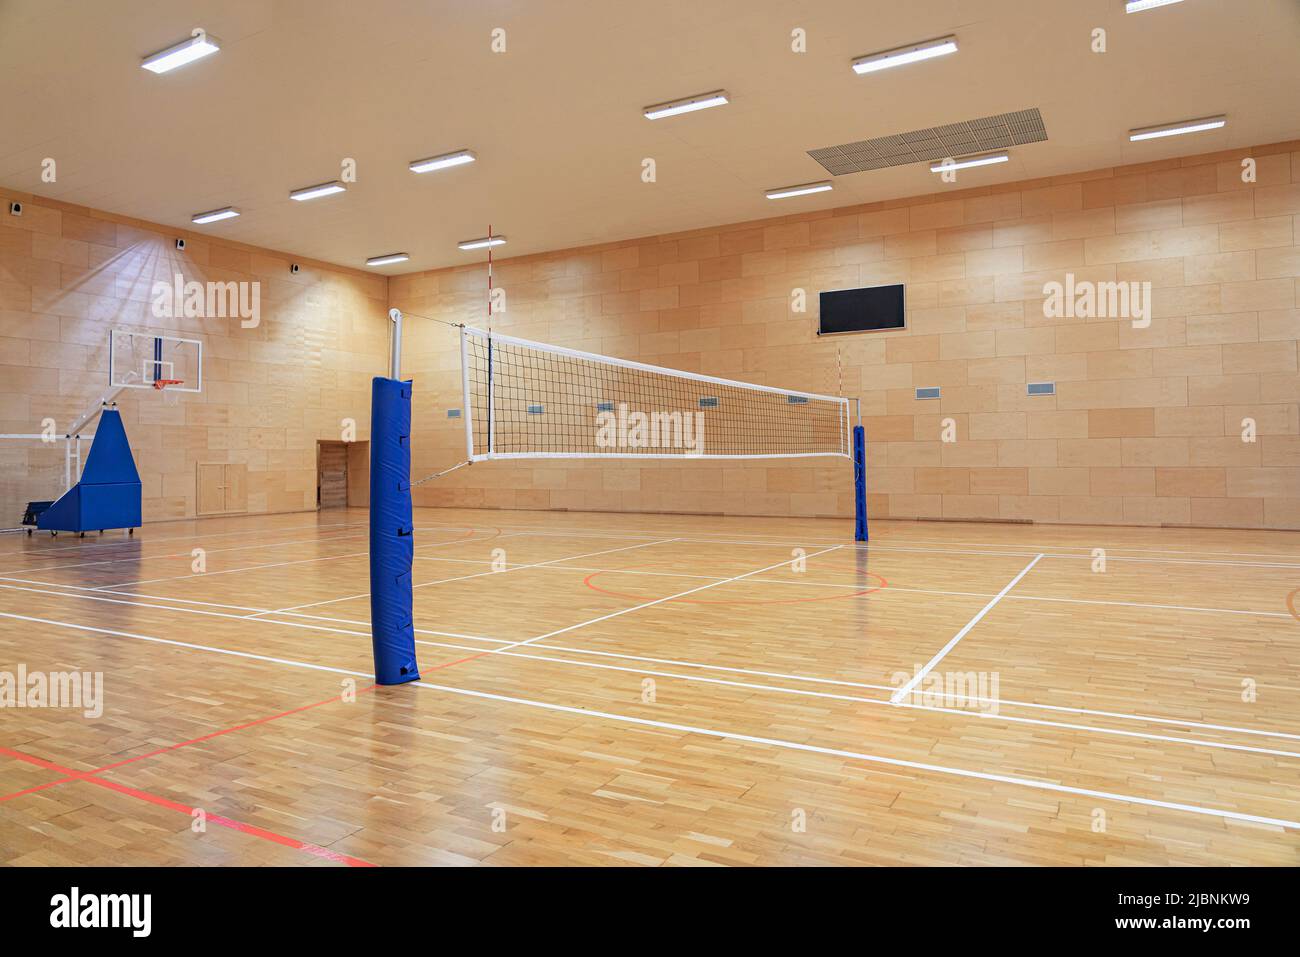 Volleyball net in an empty gym with a mobile basketball hoop in the background Stock Photo